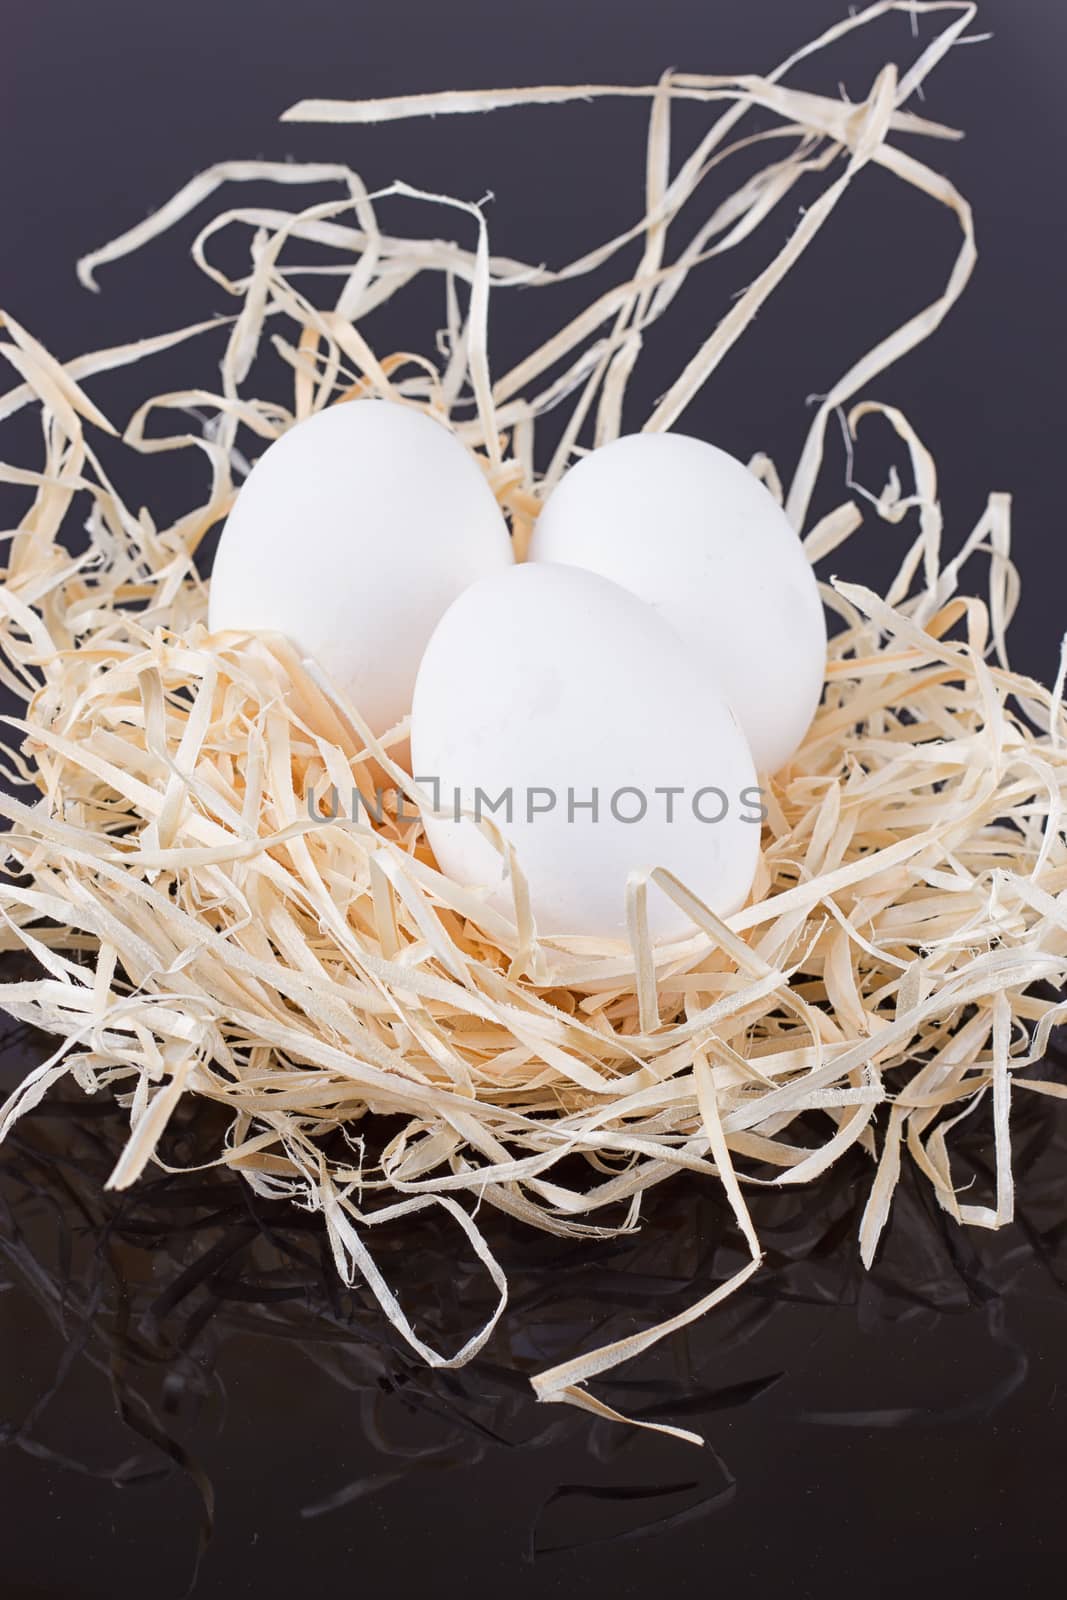 Three chicken eggs in the nest like On a black background